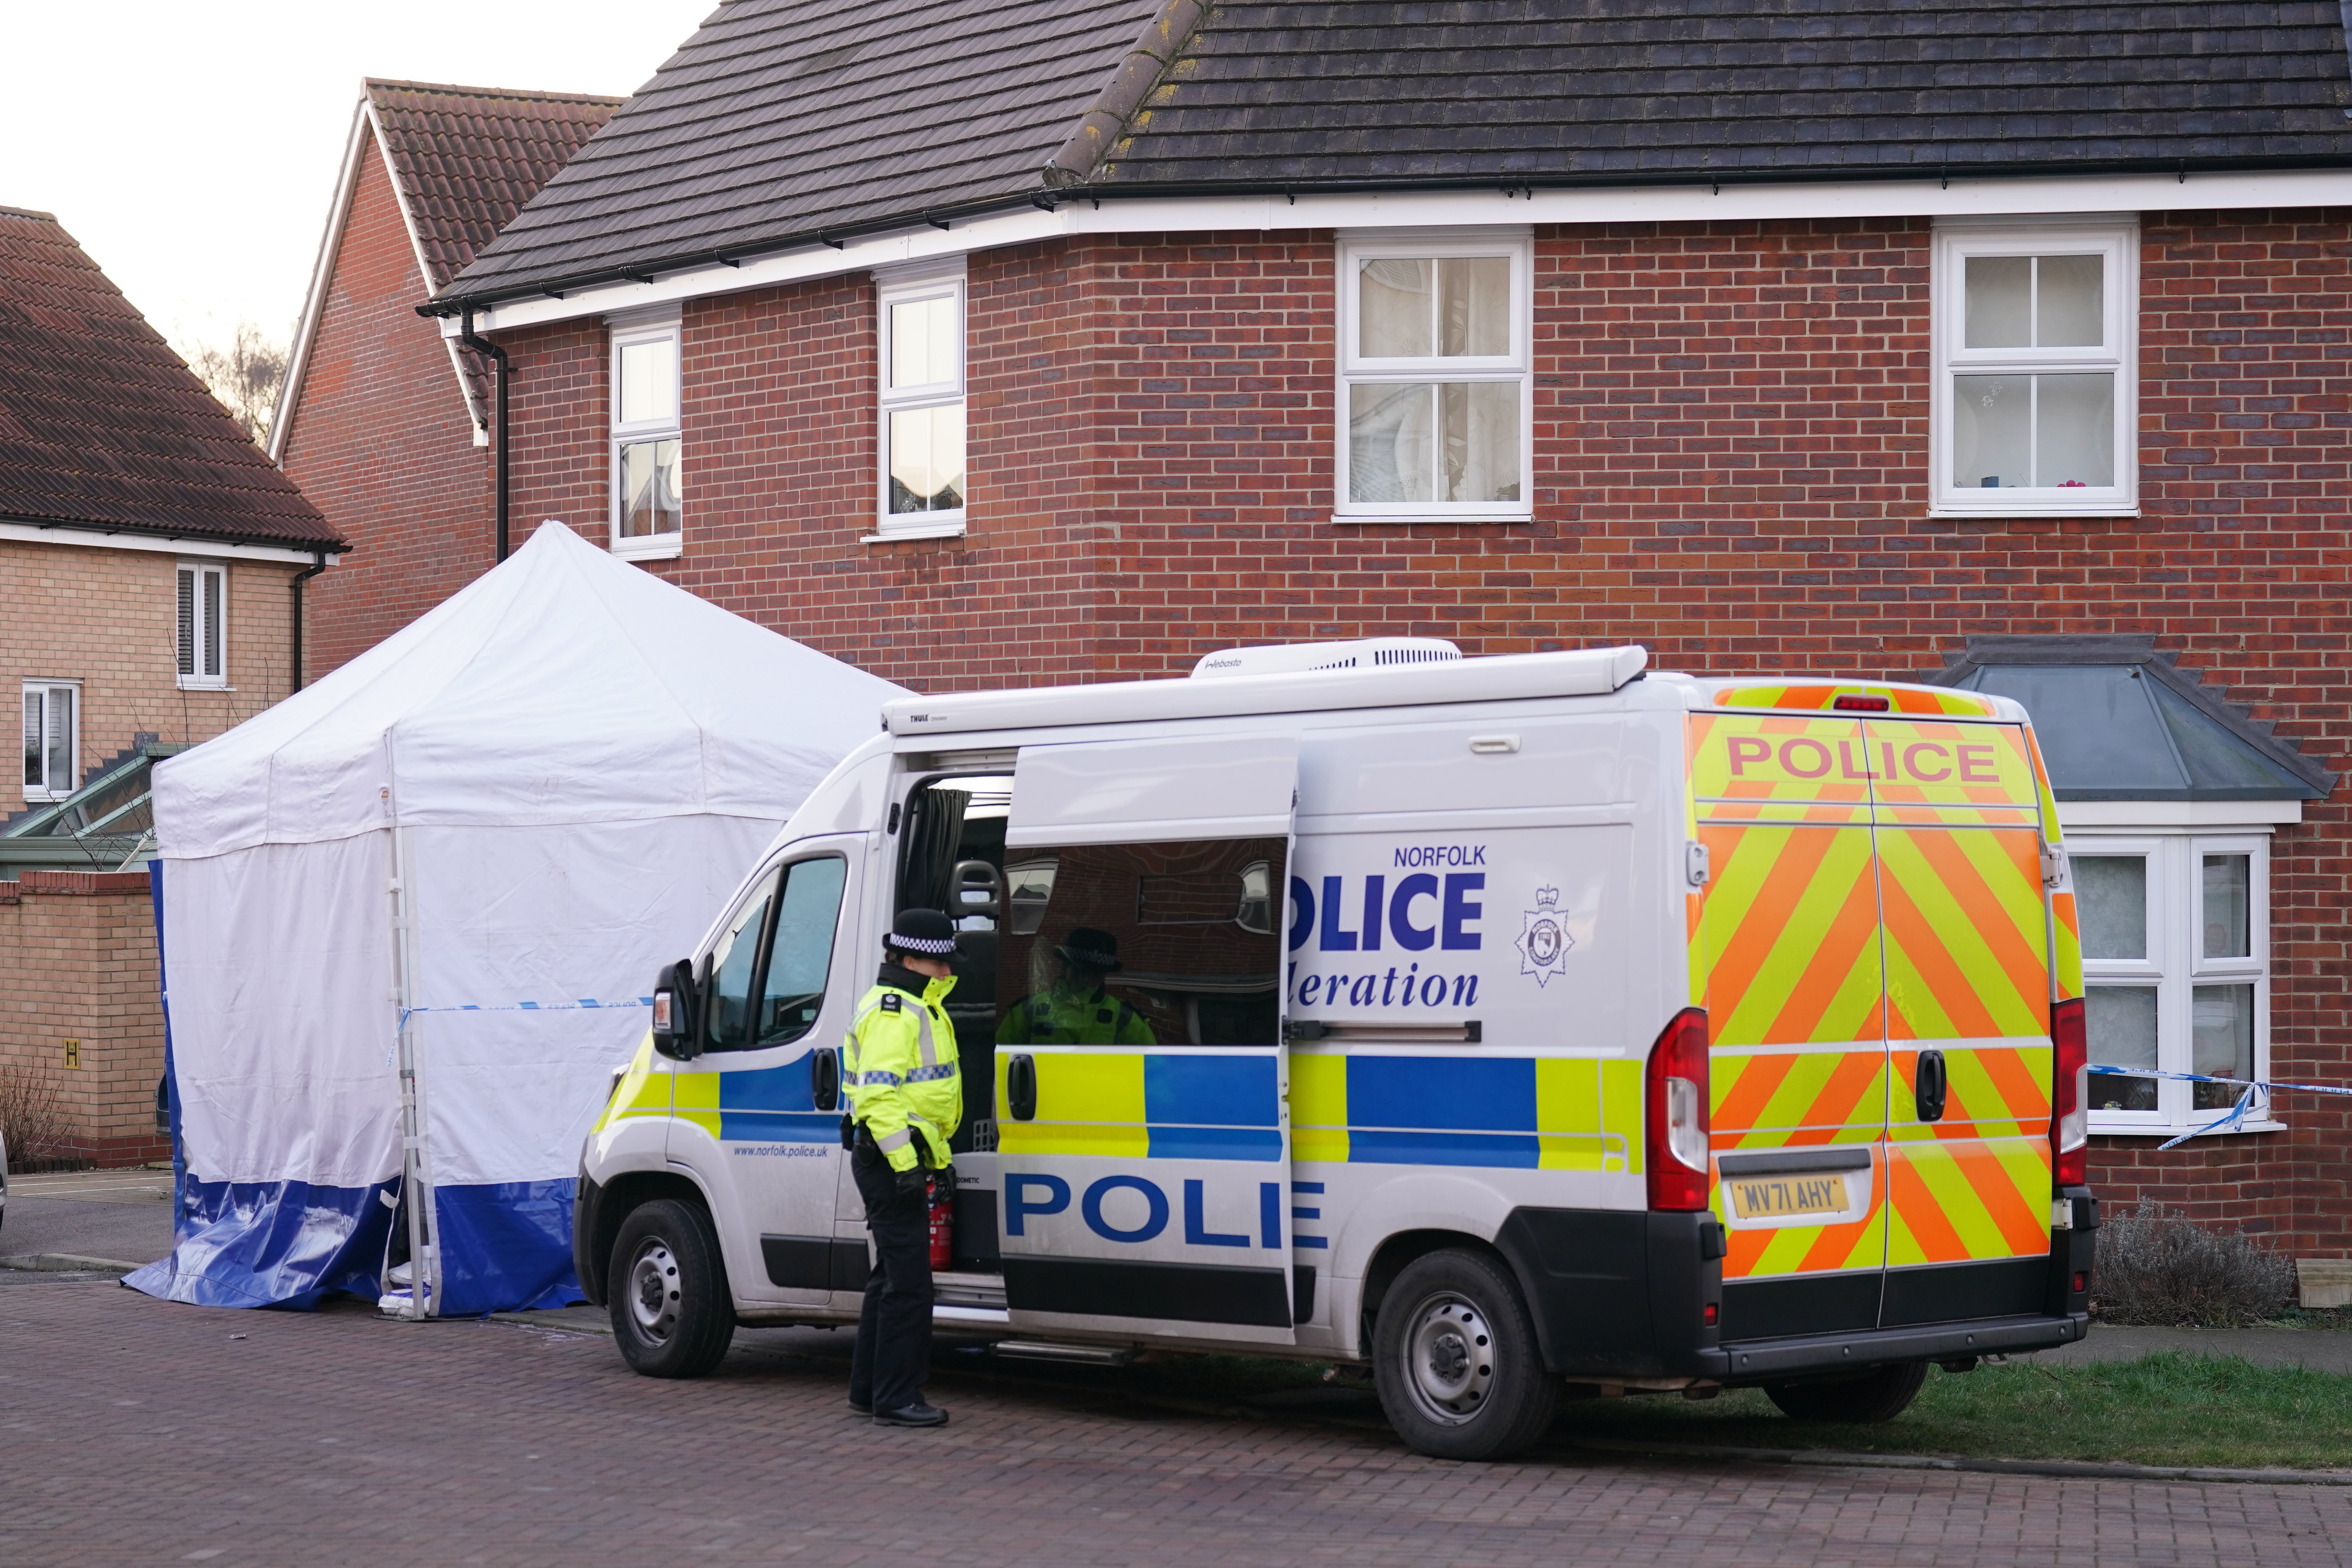 Police found the bodies after a member of the public called on Friday morning